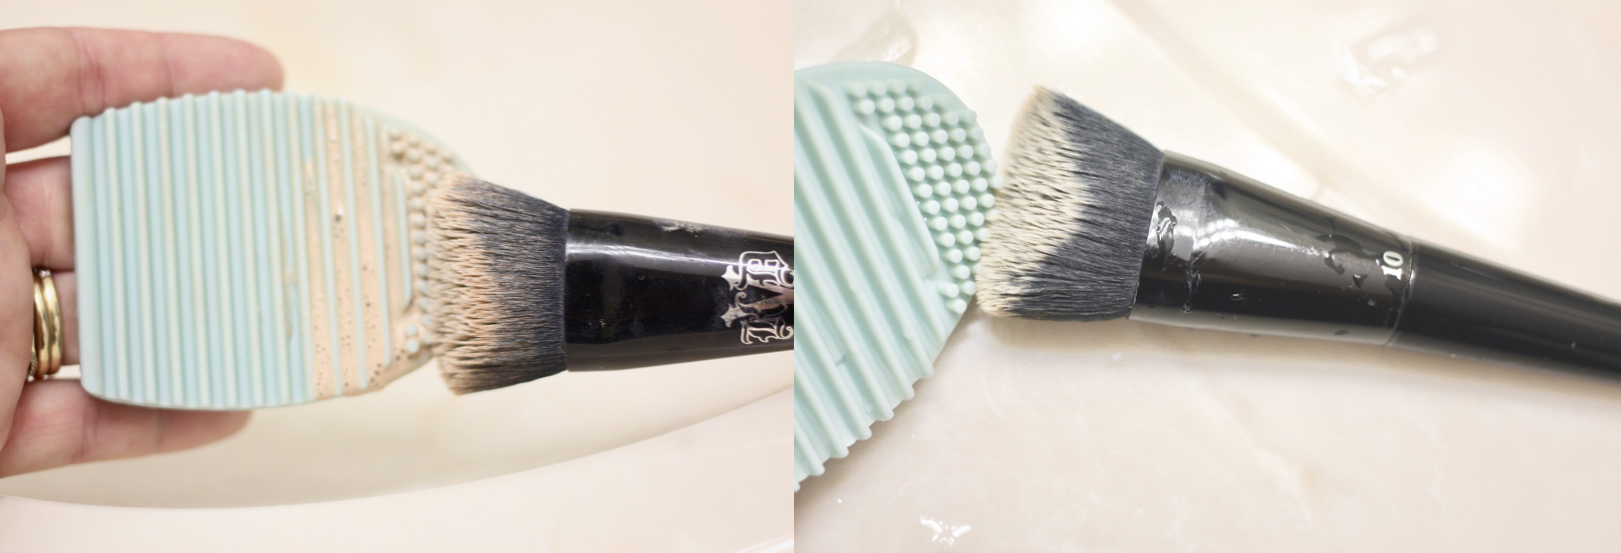 clean your makeup brushes like a pro